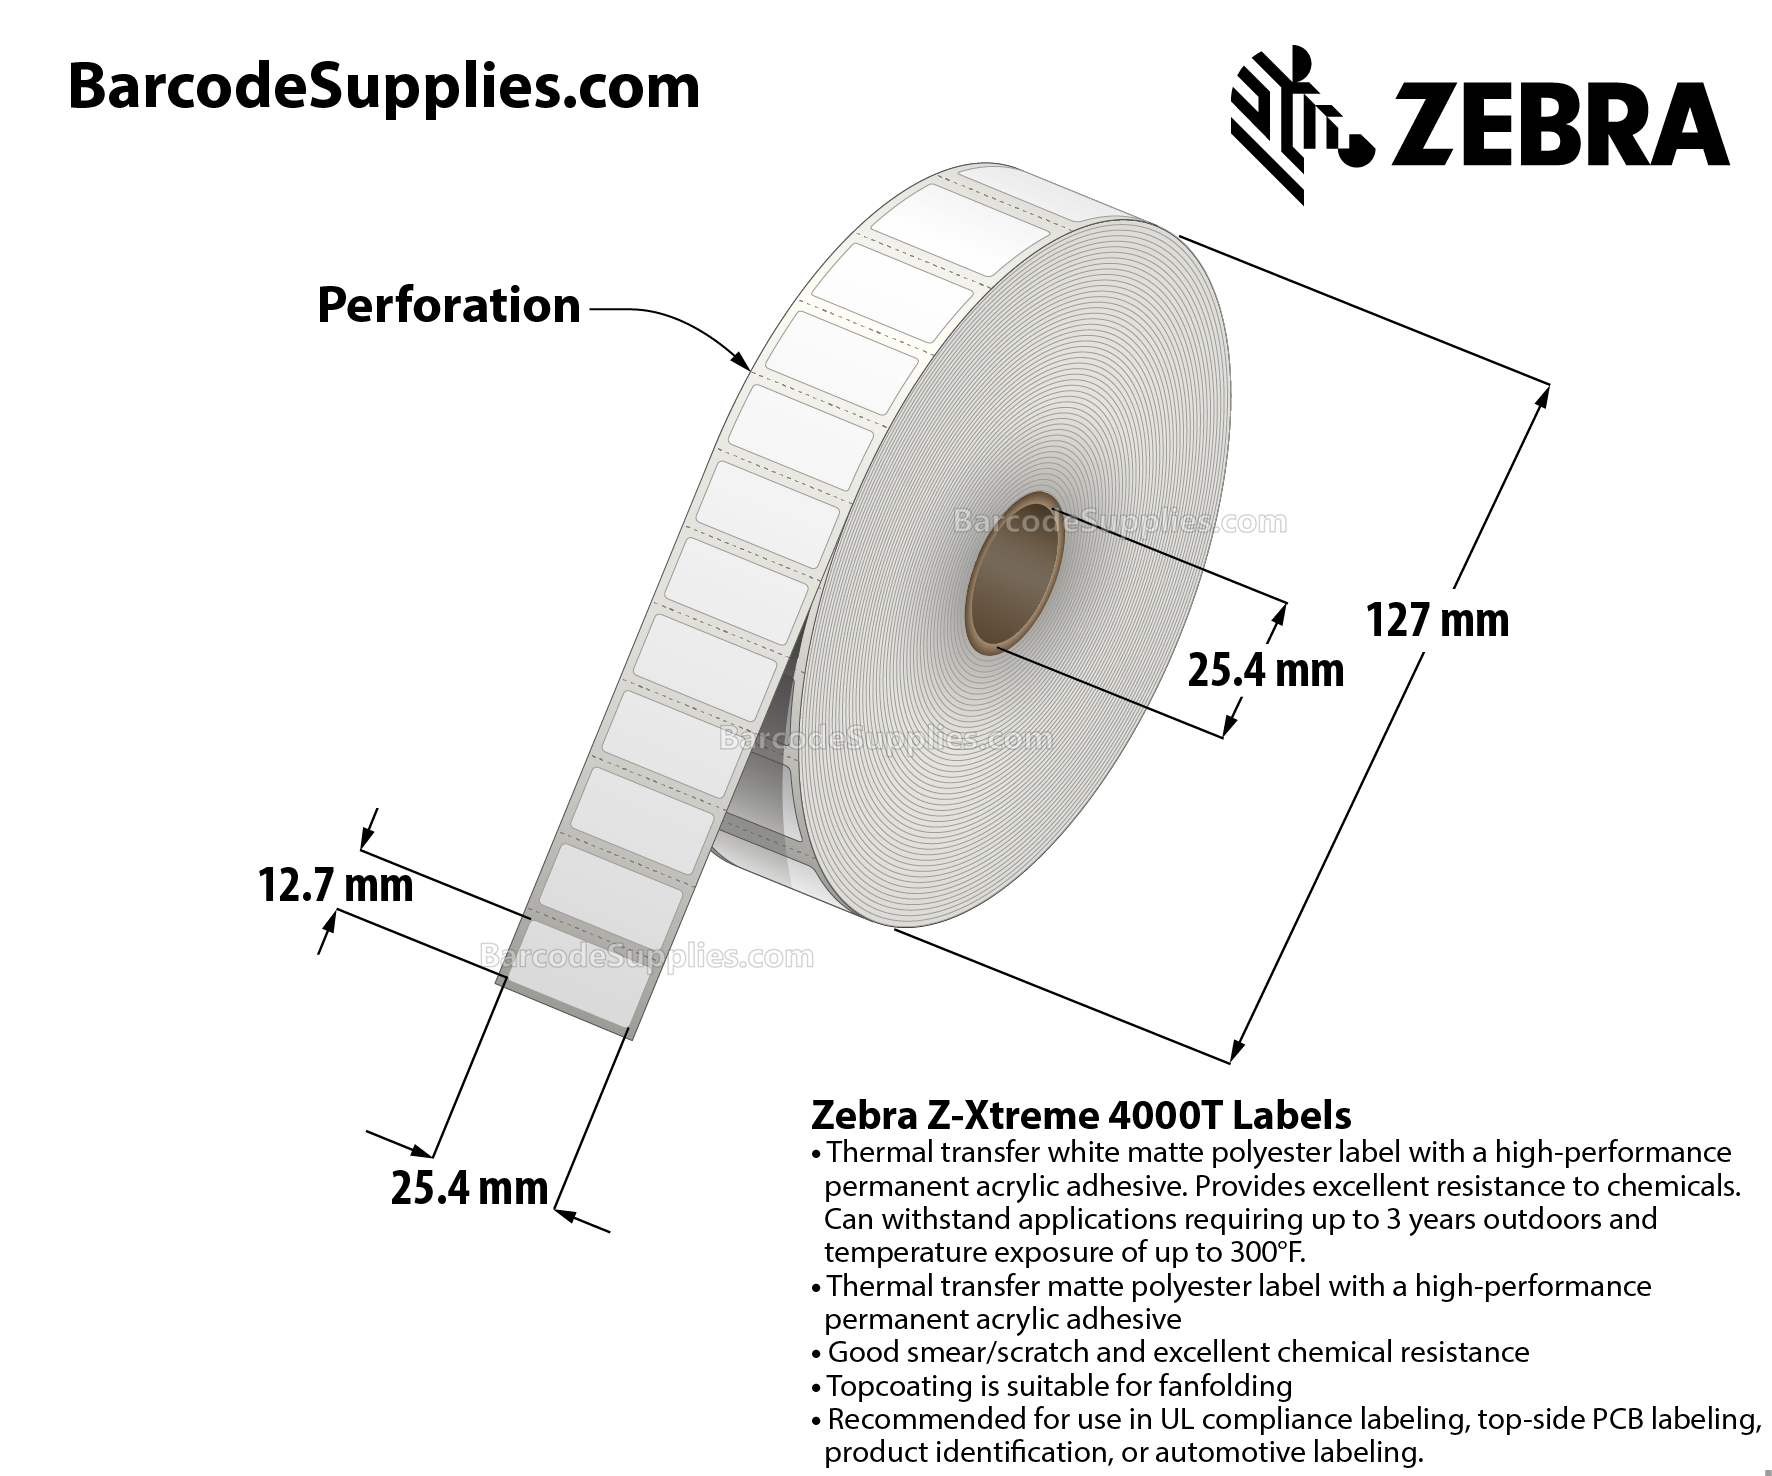 1 x 0.5 Thermal Transfer White Z-Xtreme 4000T White Labels With Permanent Adhesive - Perforated - 3000 Labels Per Roll - Carton Of 1 Rolls - 3000 Labels Total - MPN: 10023341